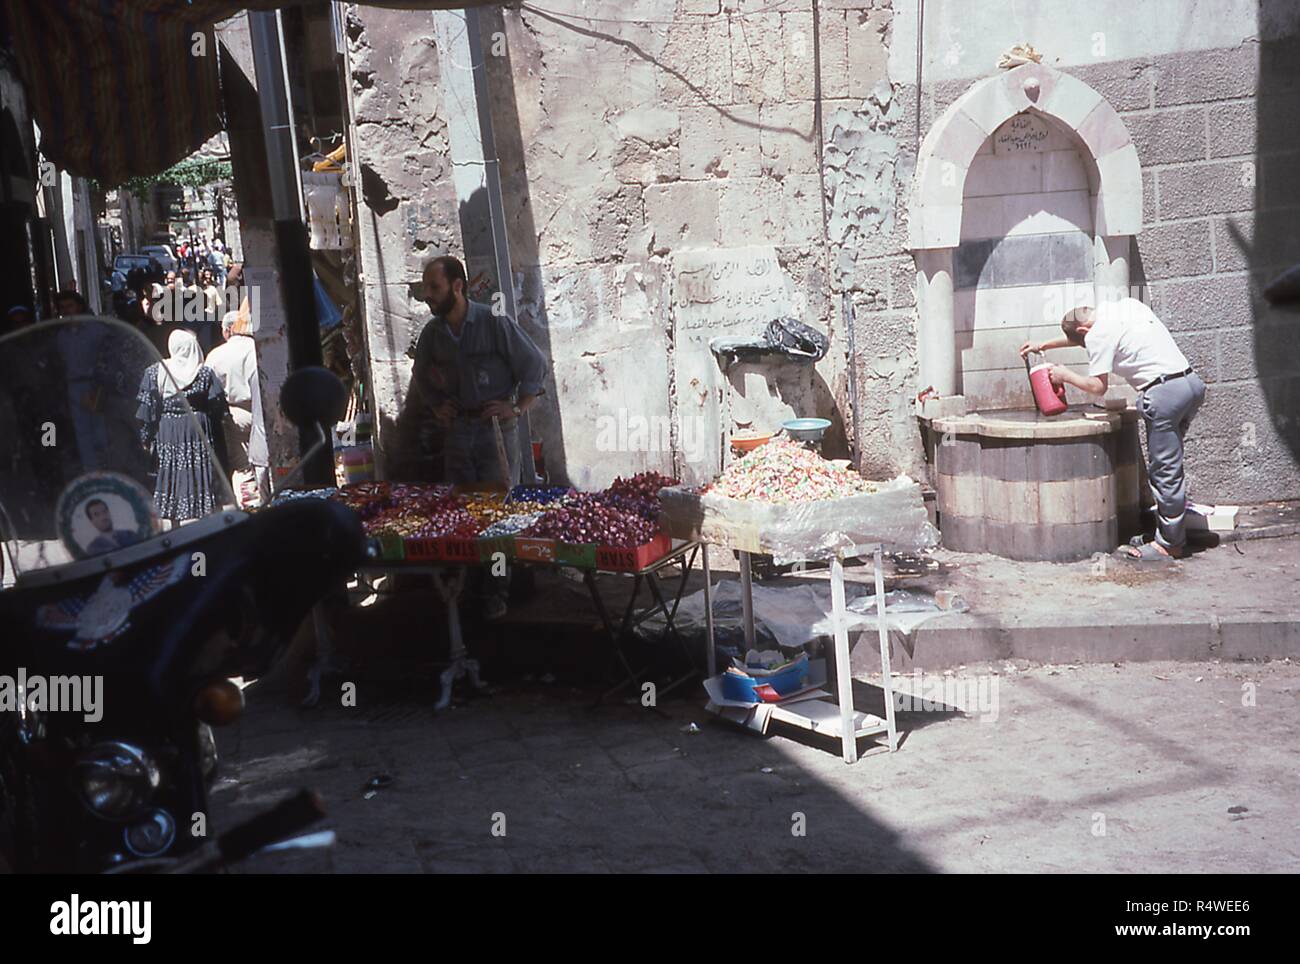 View of a merchant selling fruits and candies in the souk of Damascus, Syria, June 1994. At right, a man draws water from a public stone fountain. At left foreground is a motorcycle with a memorial sticker for Bassel al-Assad, eldest son of President Hafez al-Assad, who died in January 1994. () Stock Photo